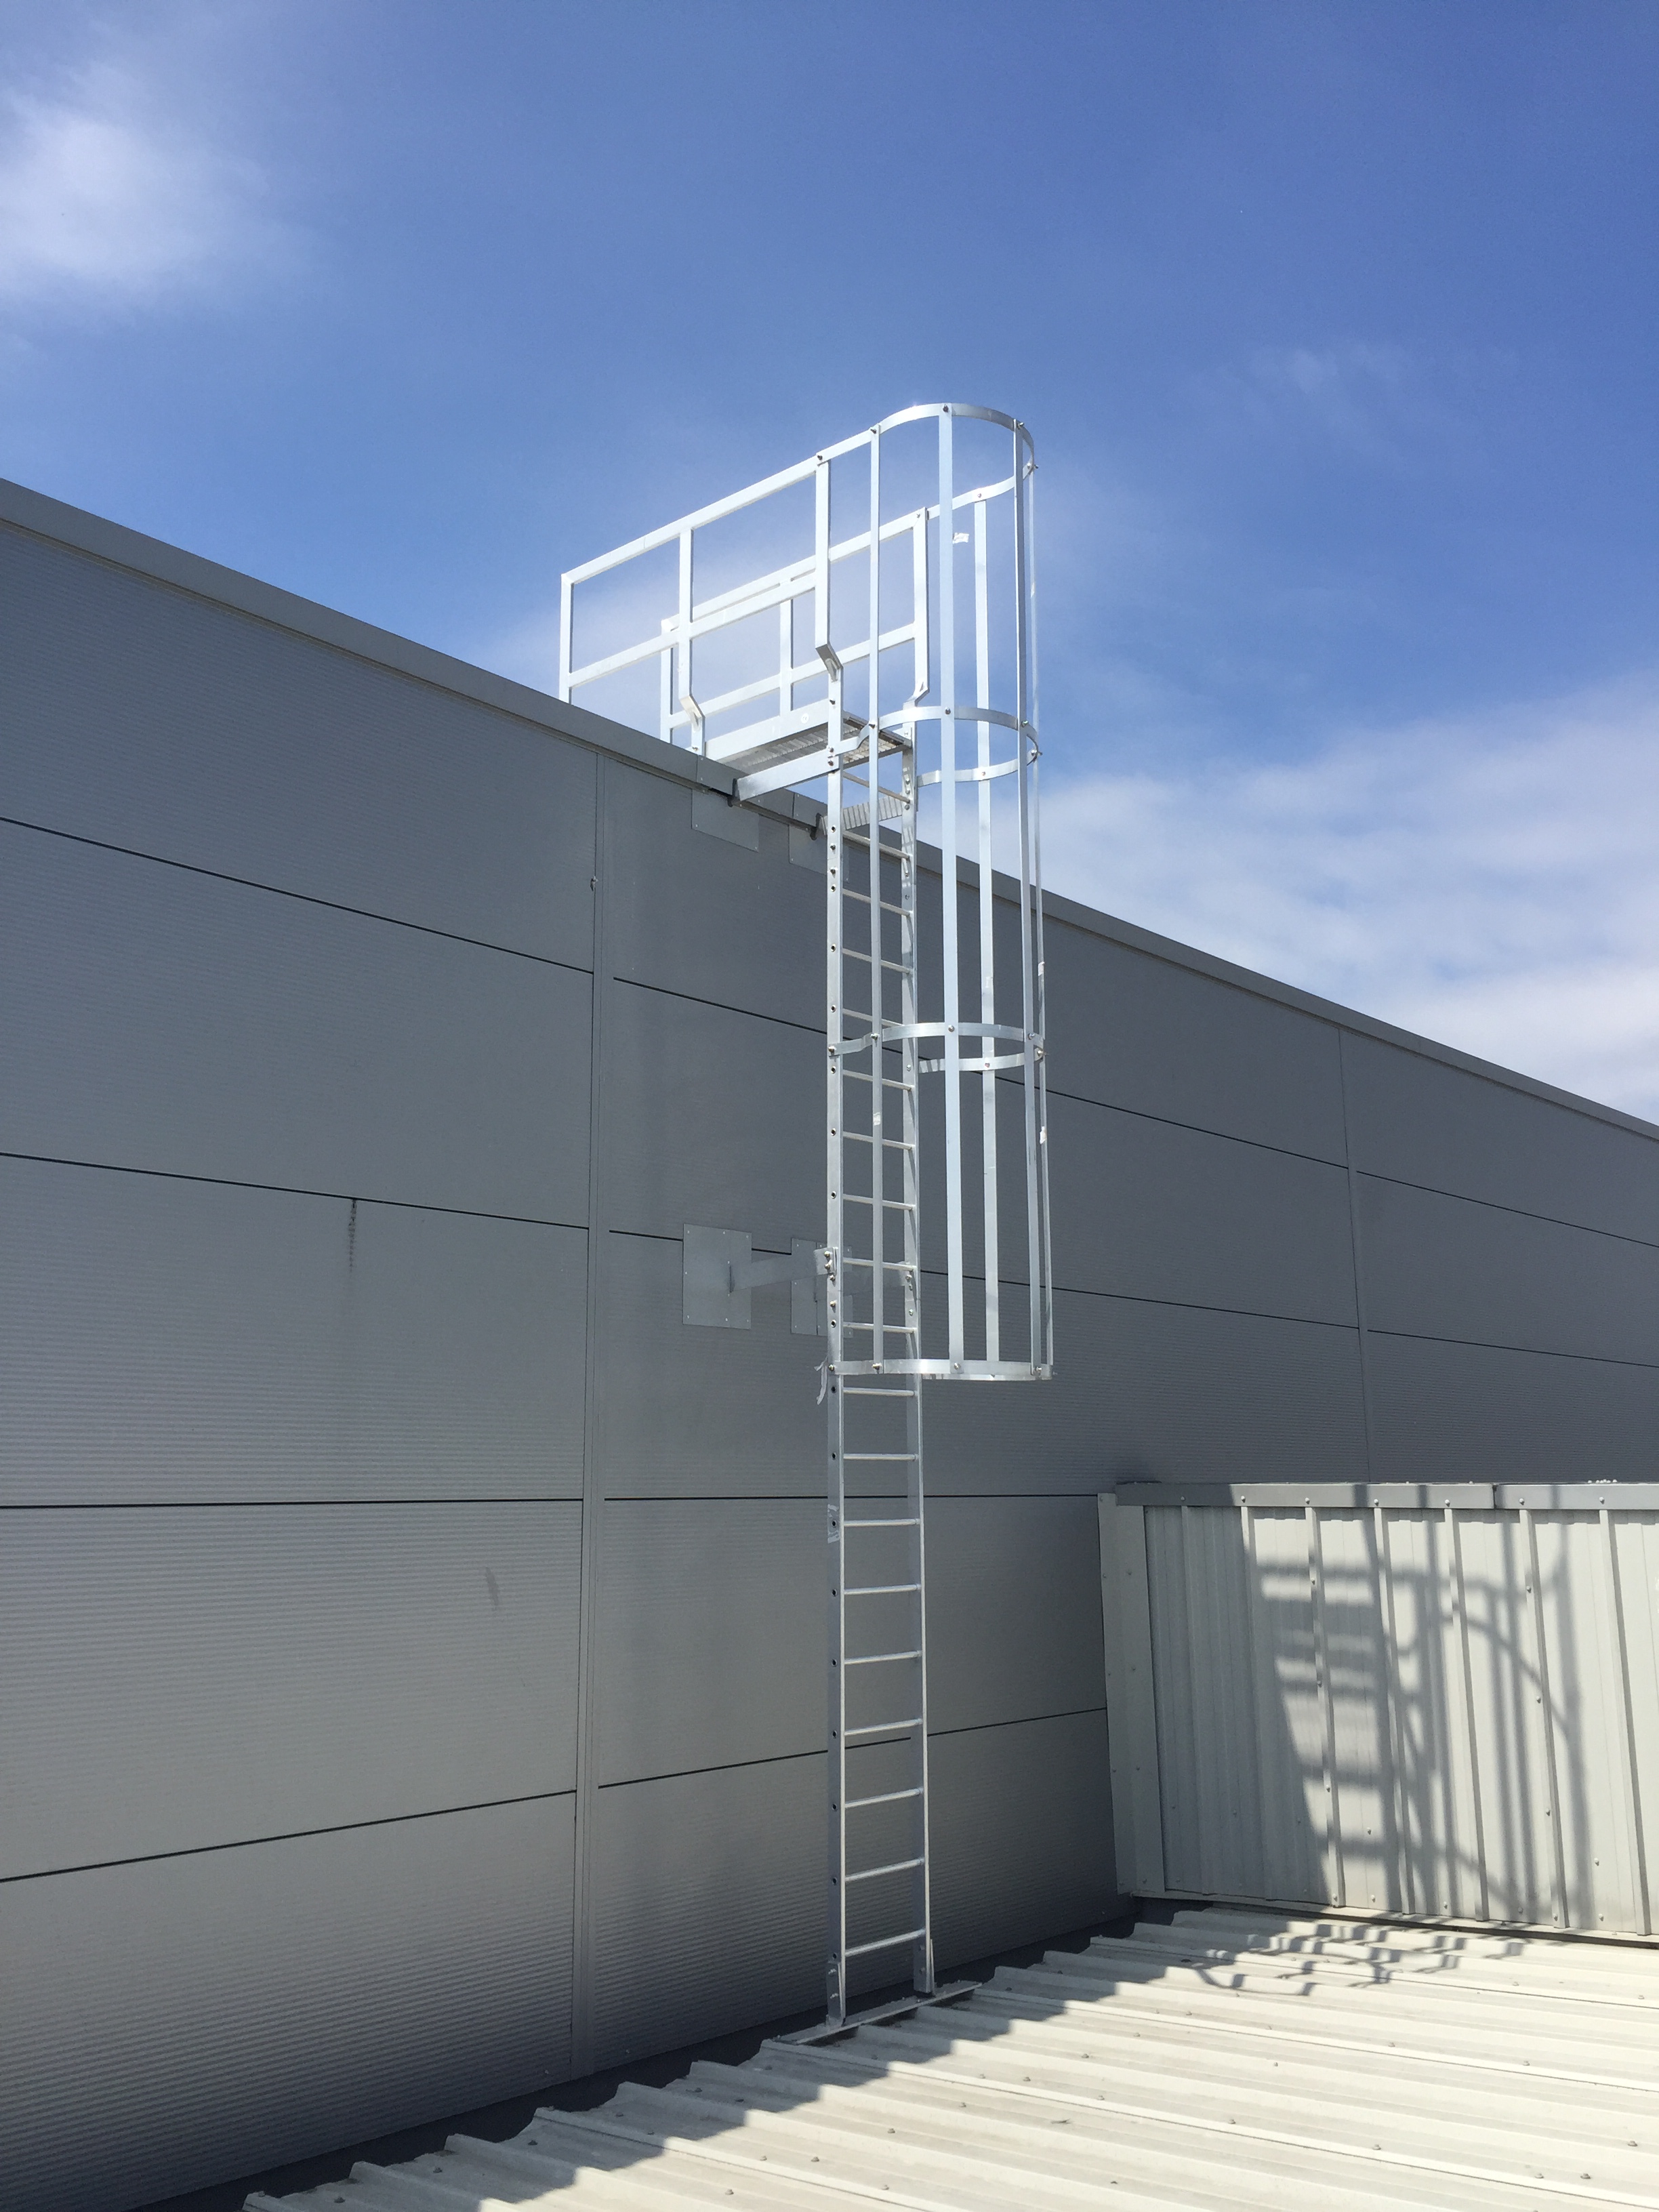 Access Ladder Safety Testing and Compliance